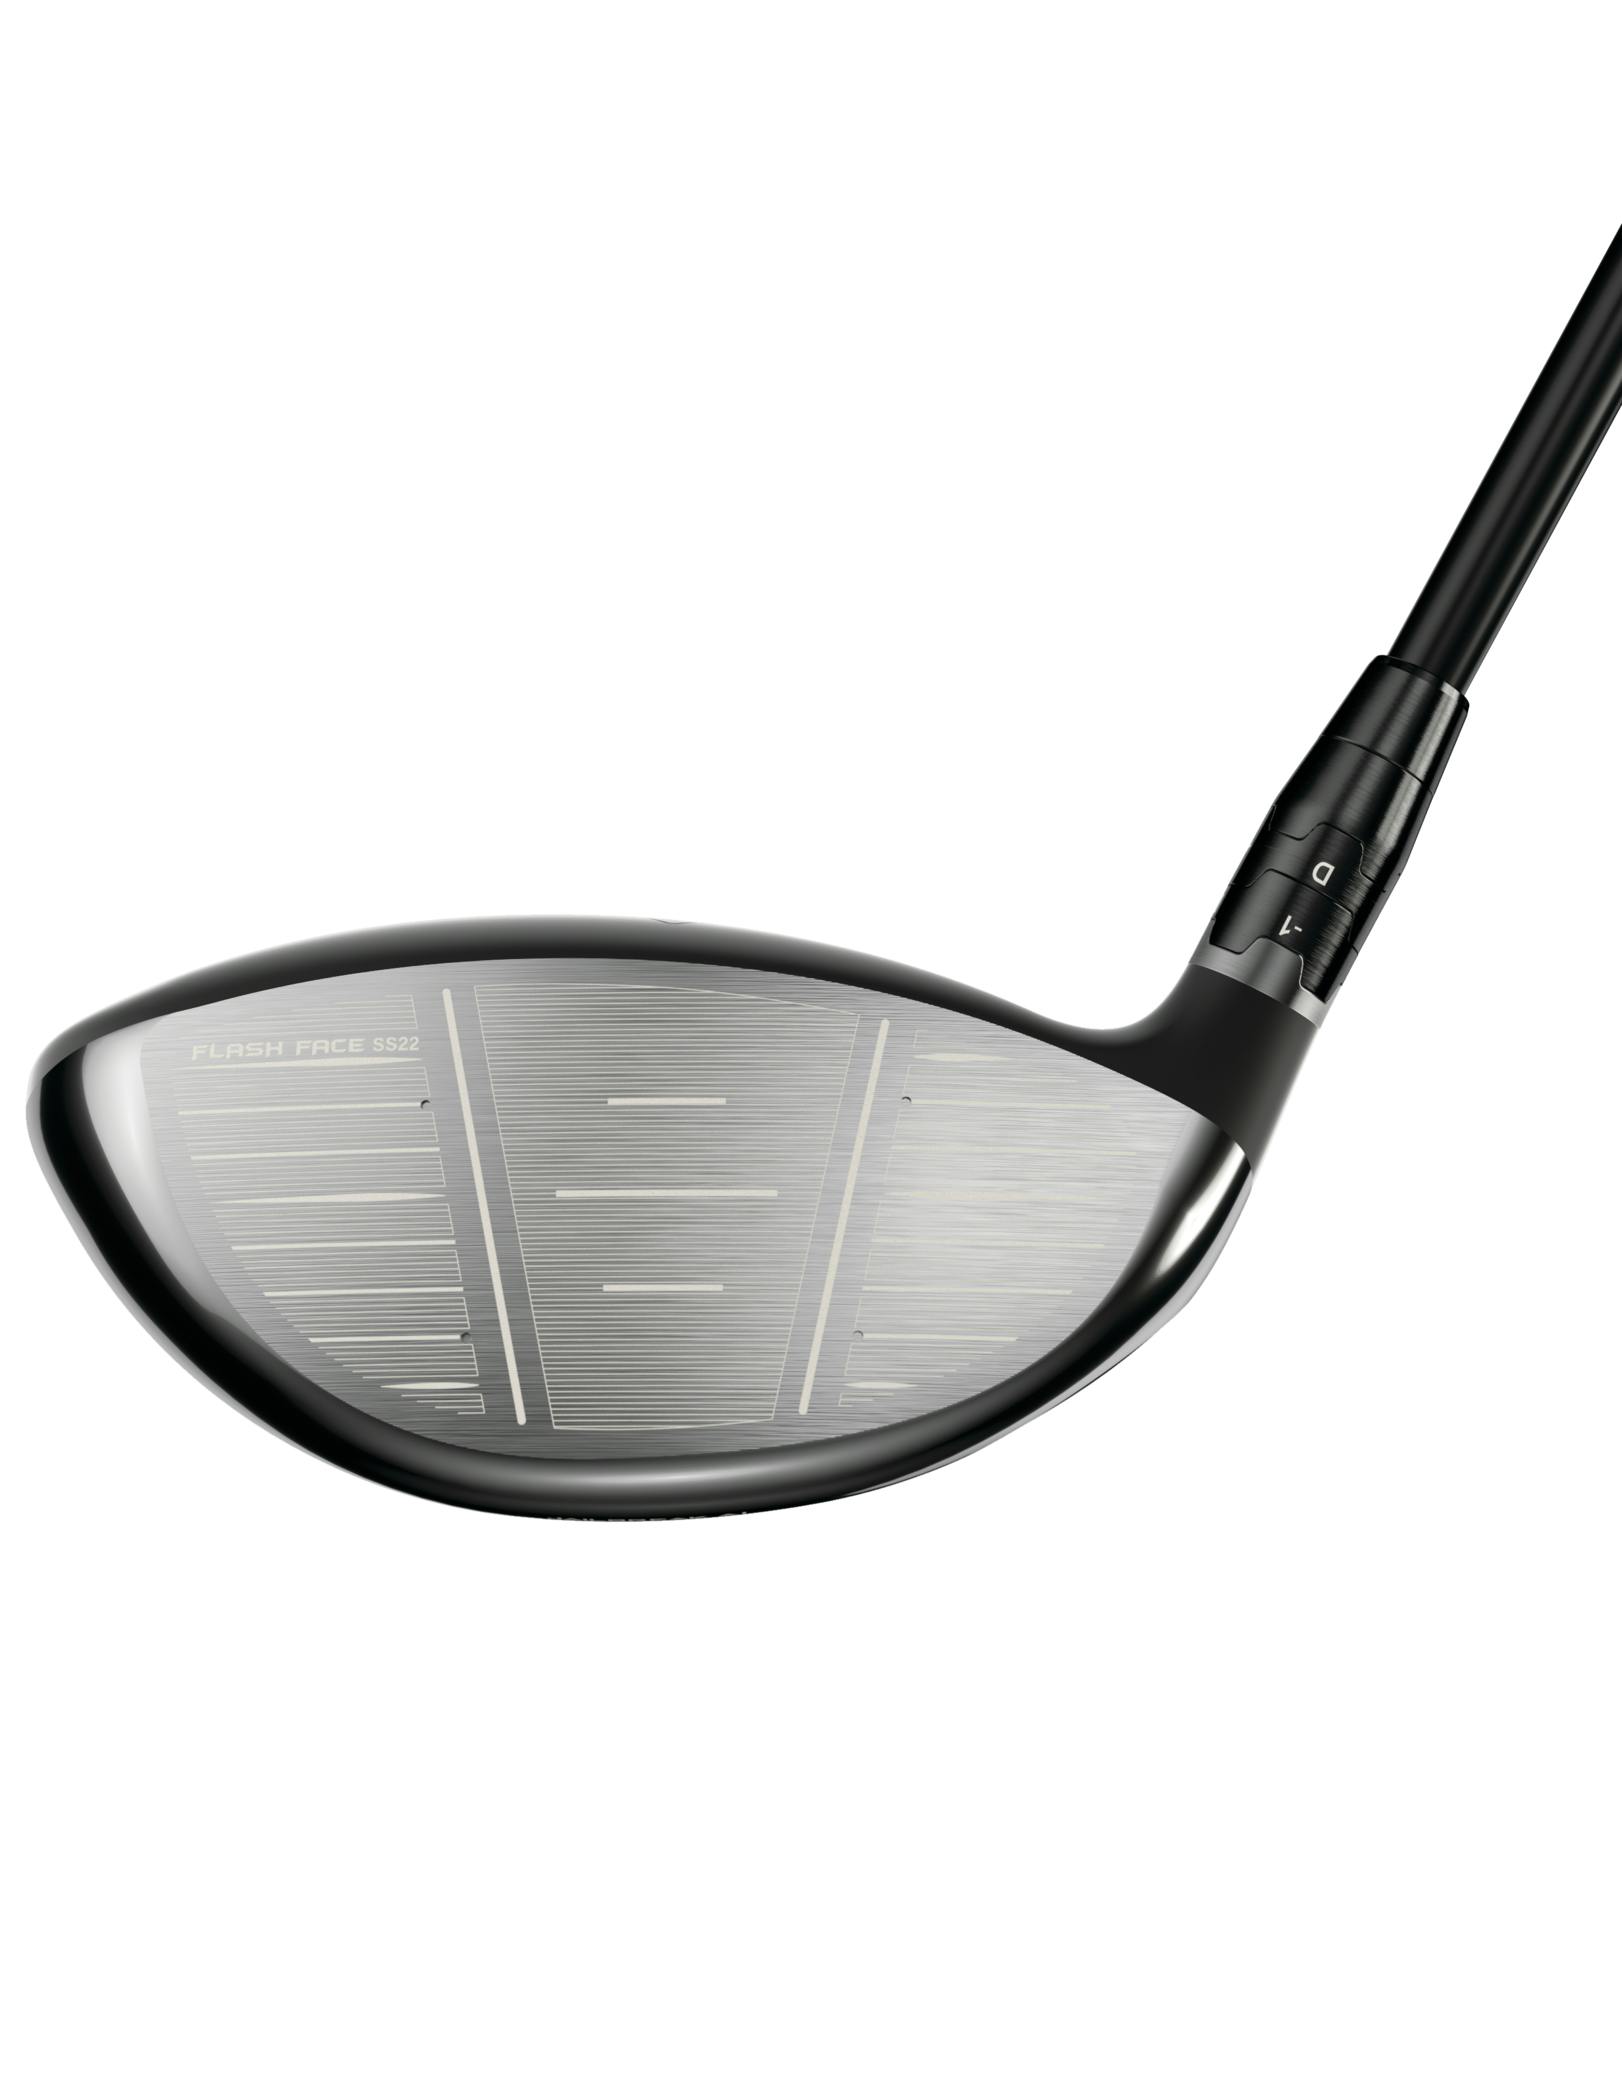 Callaway Rogue ST Max Driver · Right handed · Stiff · 10.5°